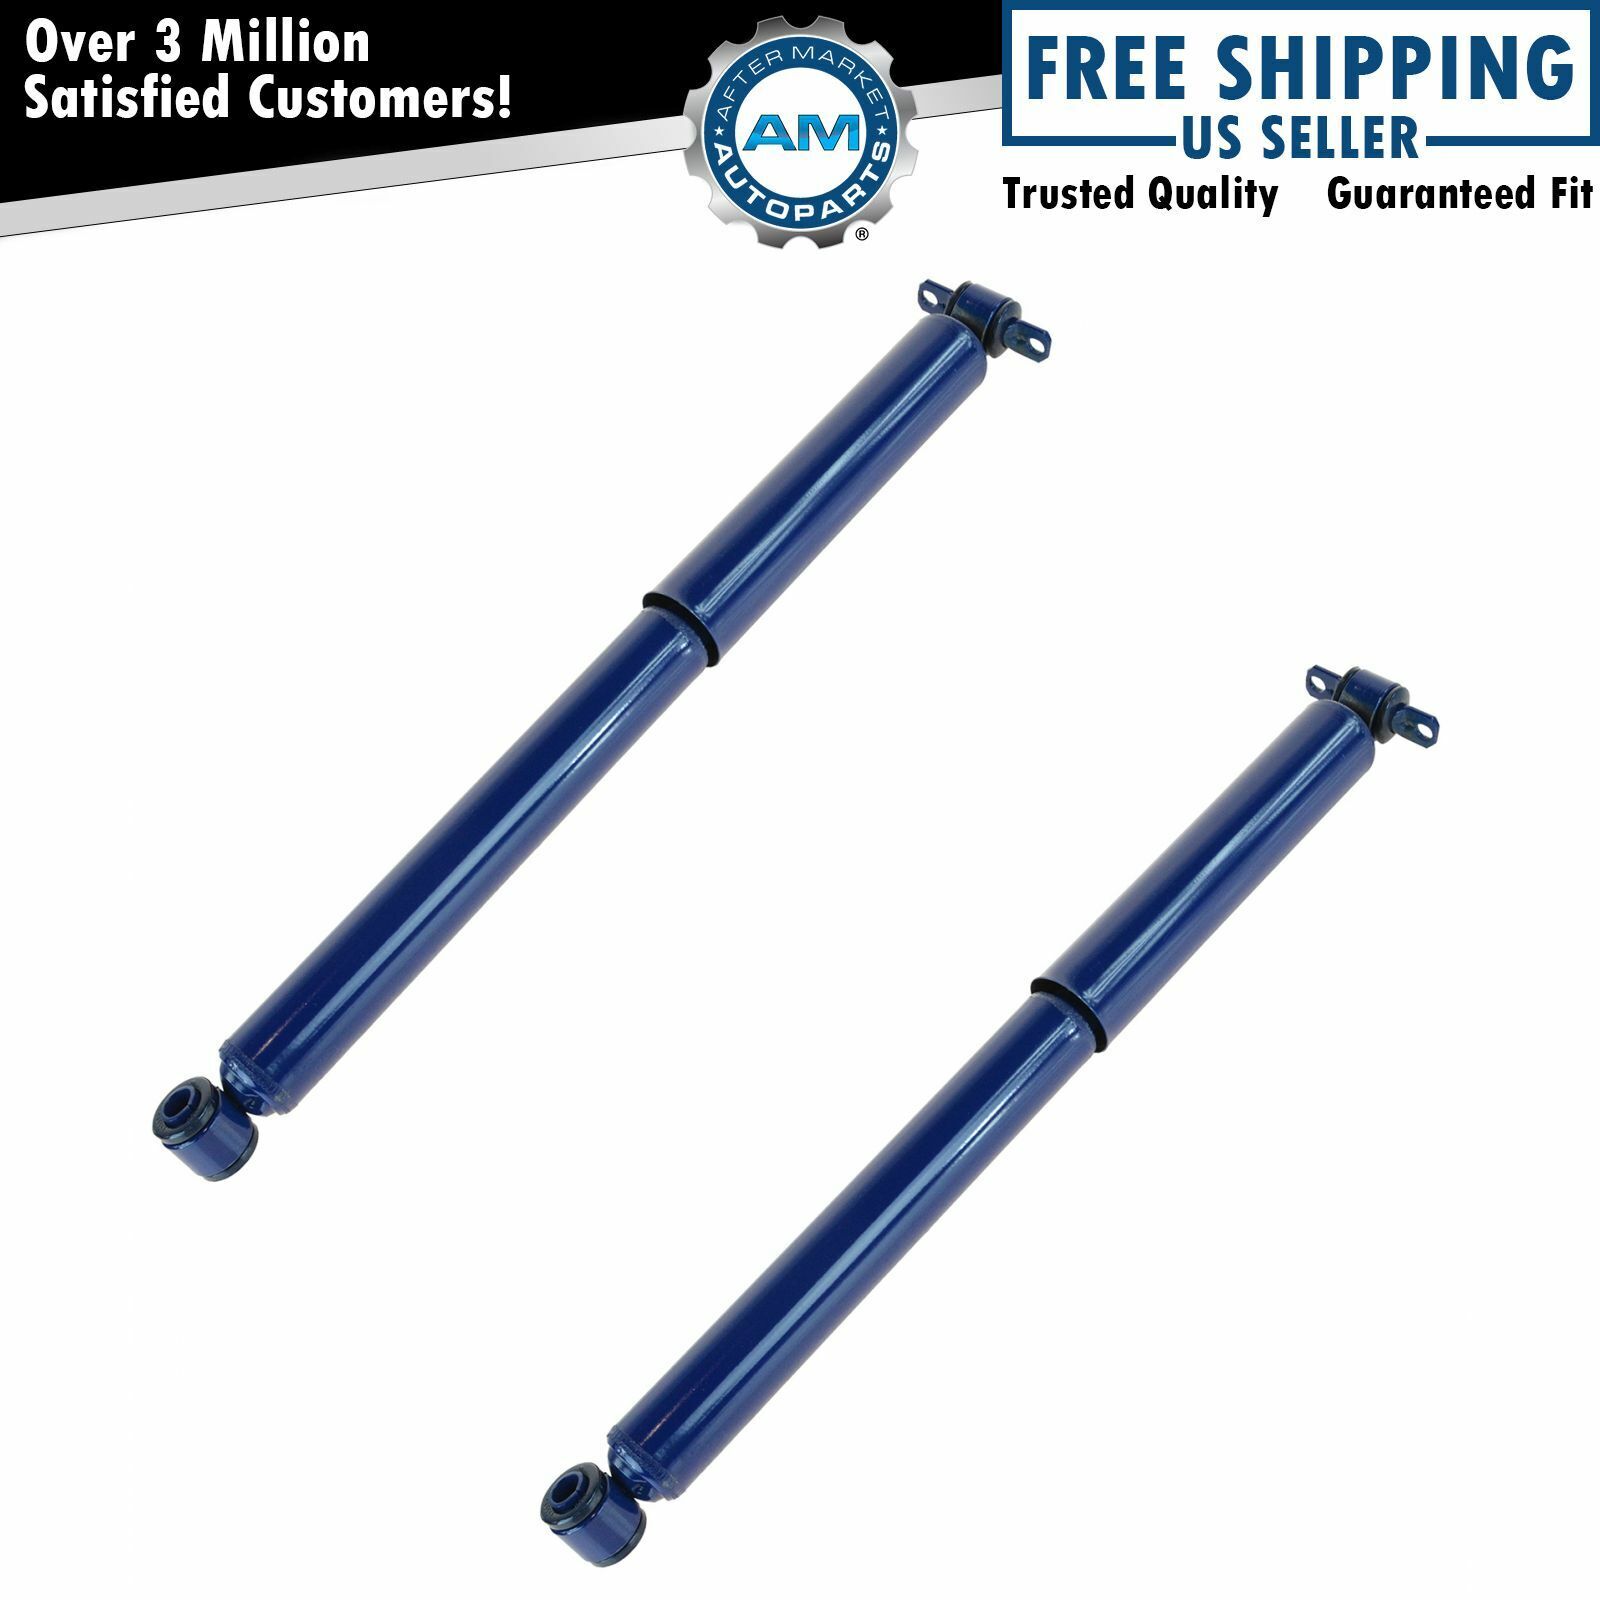 Monroe-Matic Plus Shock Absorber Rear Pair Set for Chevy GMC S10 S15 Pickup SUV